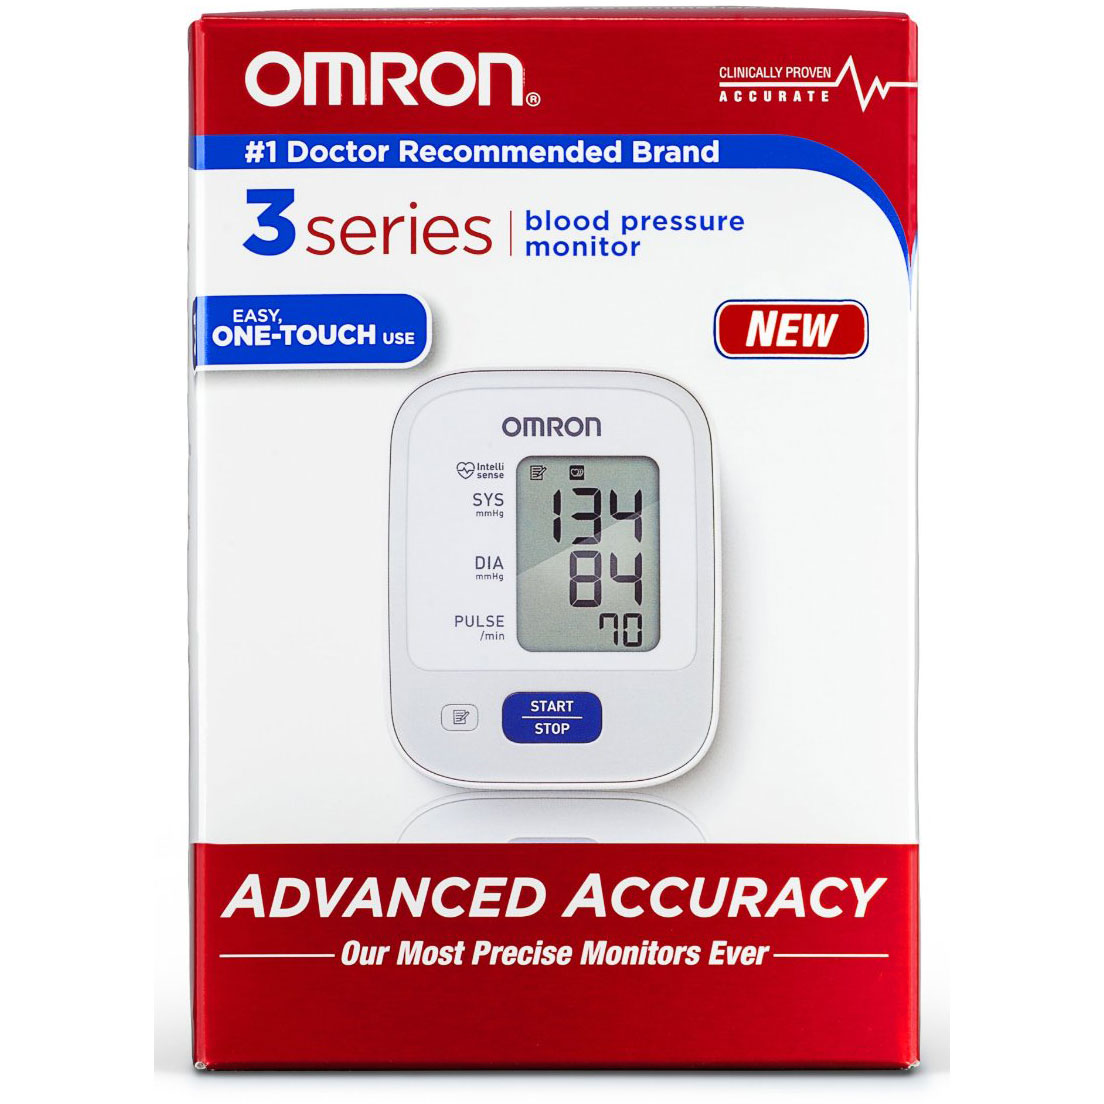 Omron 3 Series Upper Arm Blood Pressure Monitor - image 2 of 2